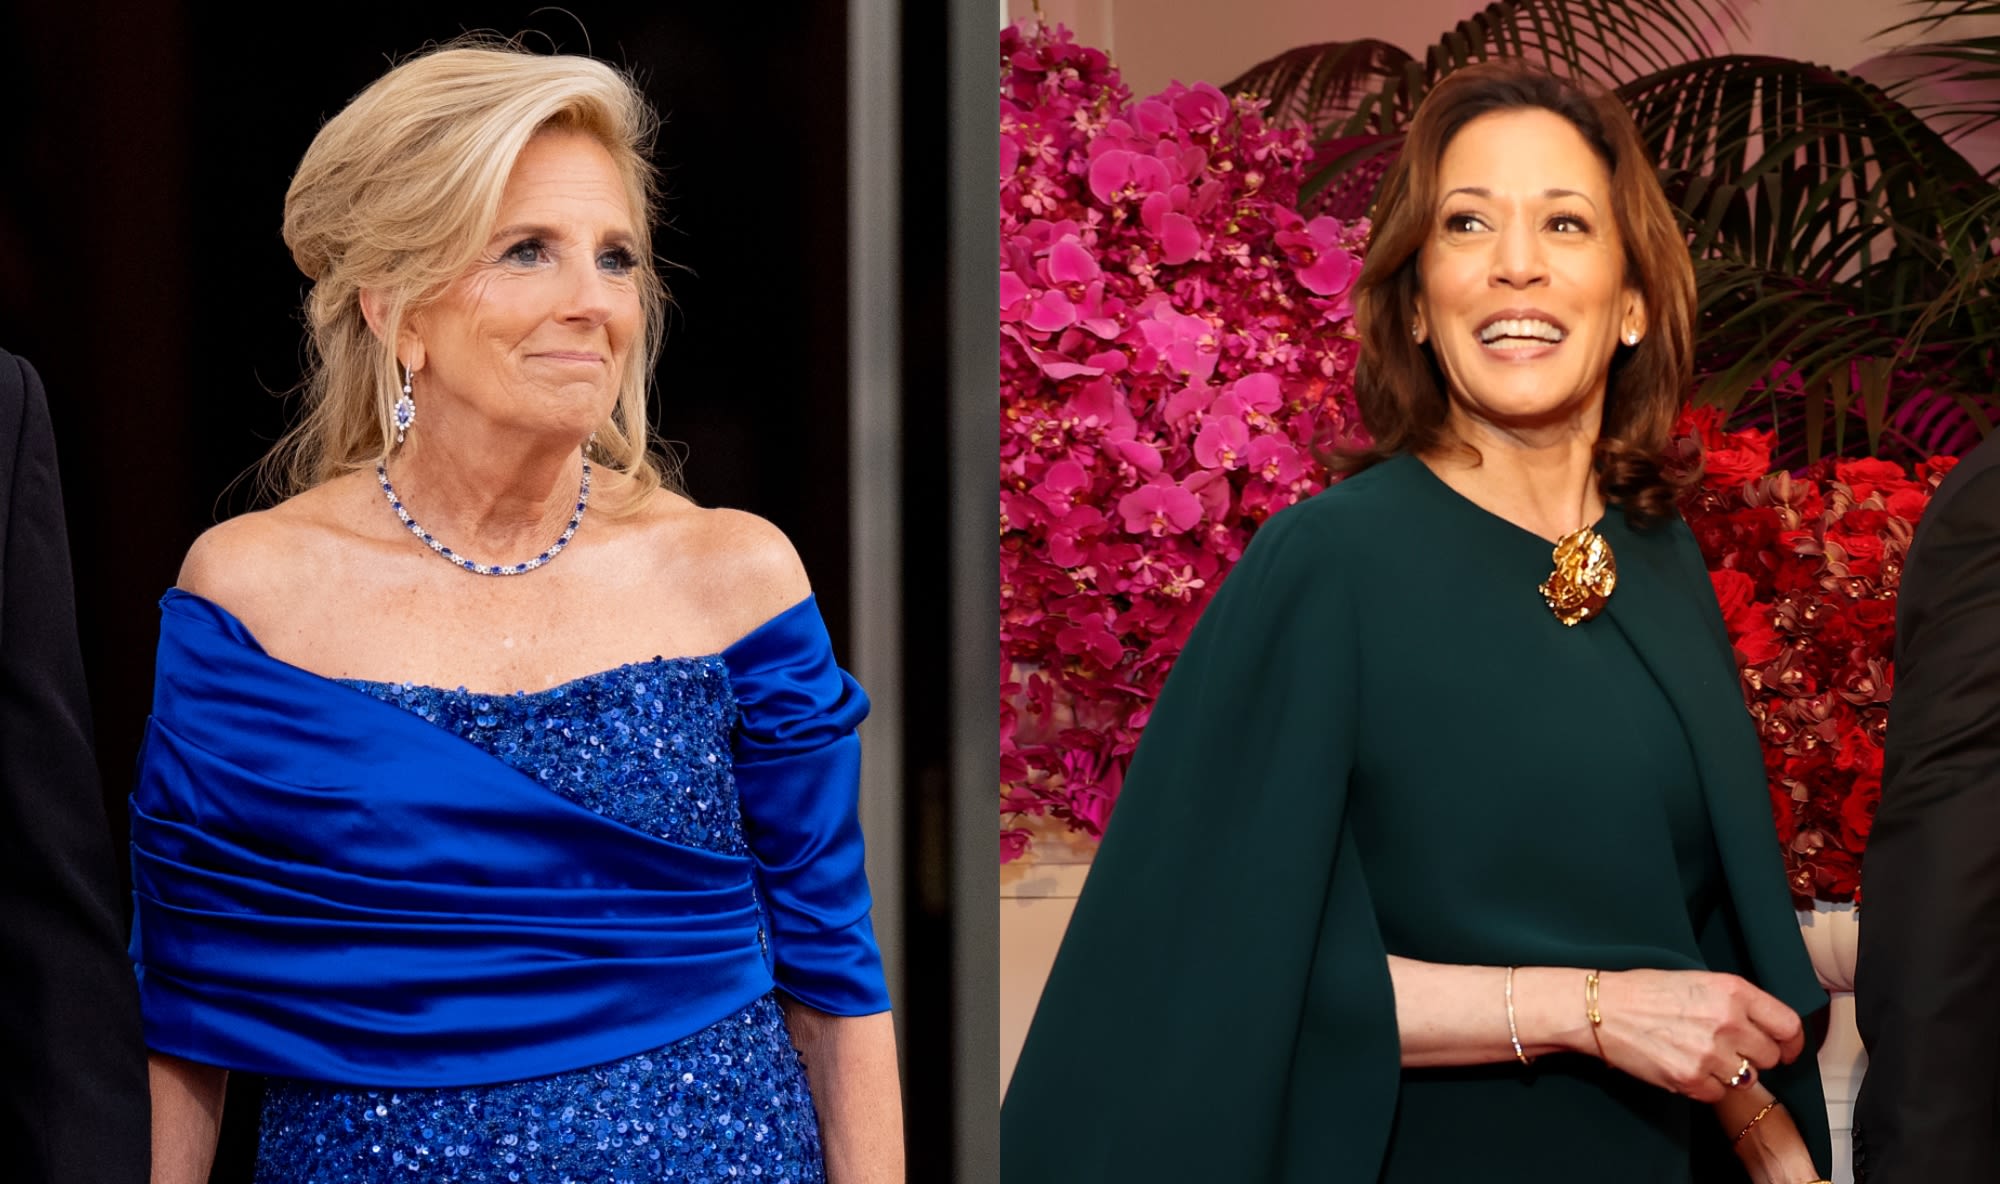 Jill Biden Dazzles in Sapphire Sergio Hudson Dress, Kamala Harris Dons Chloé Cape and More at White House State Dinner...